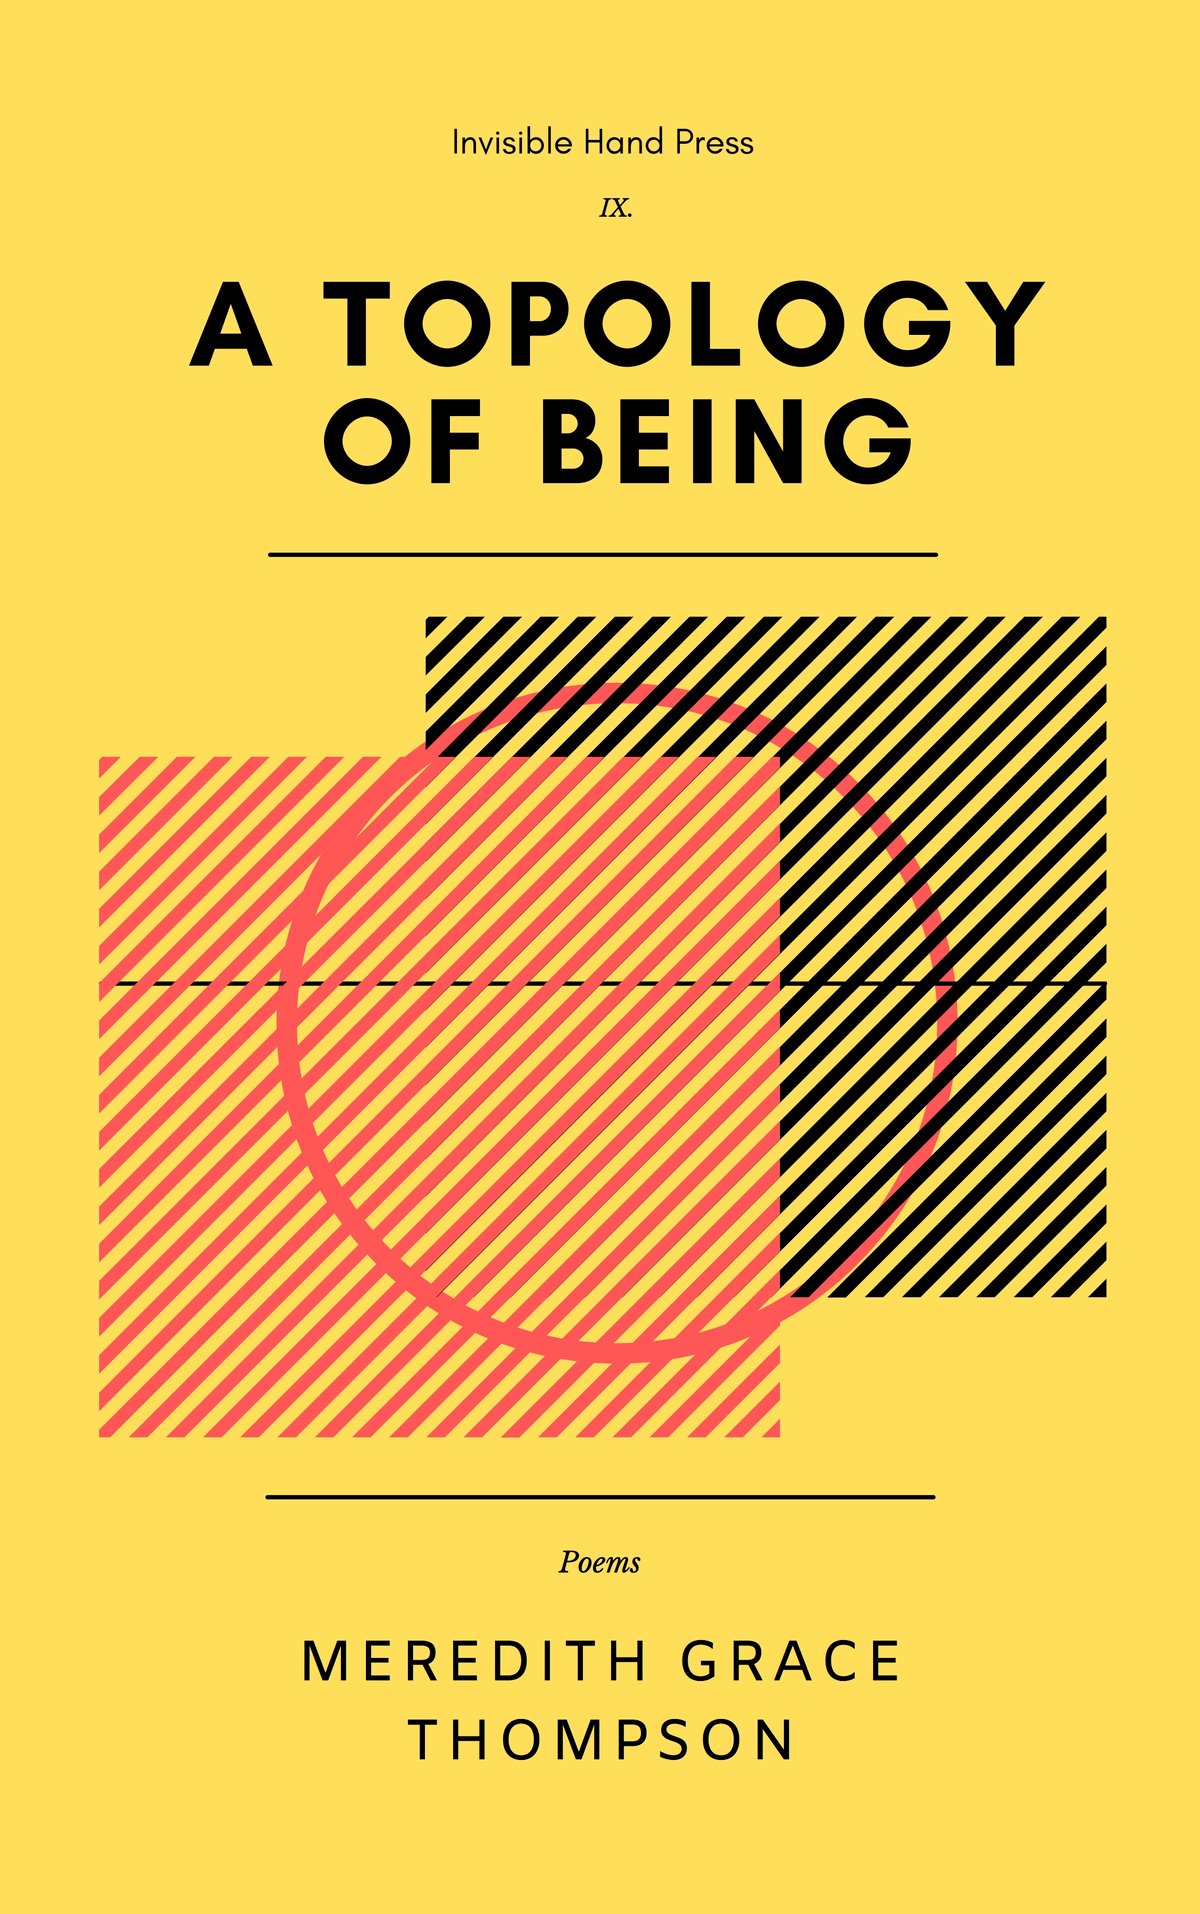 Image of A Topology of Being by Meredith Grace Thompson - Published 18 August